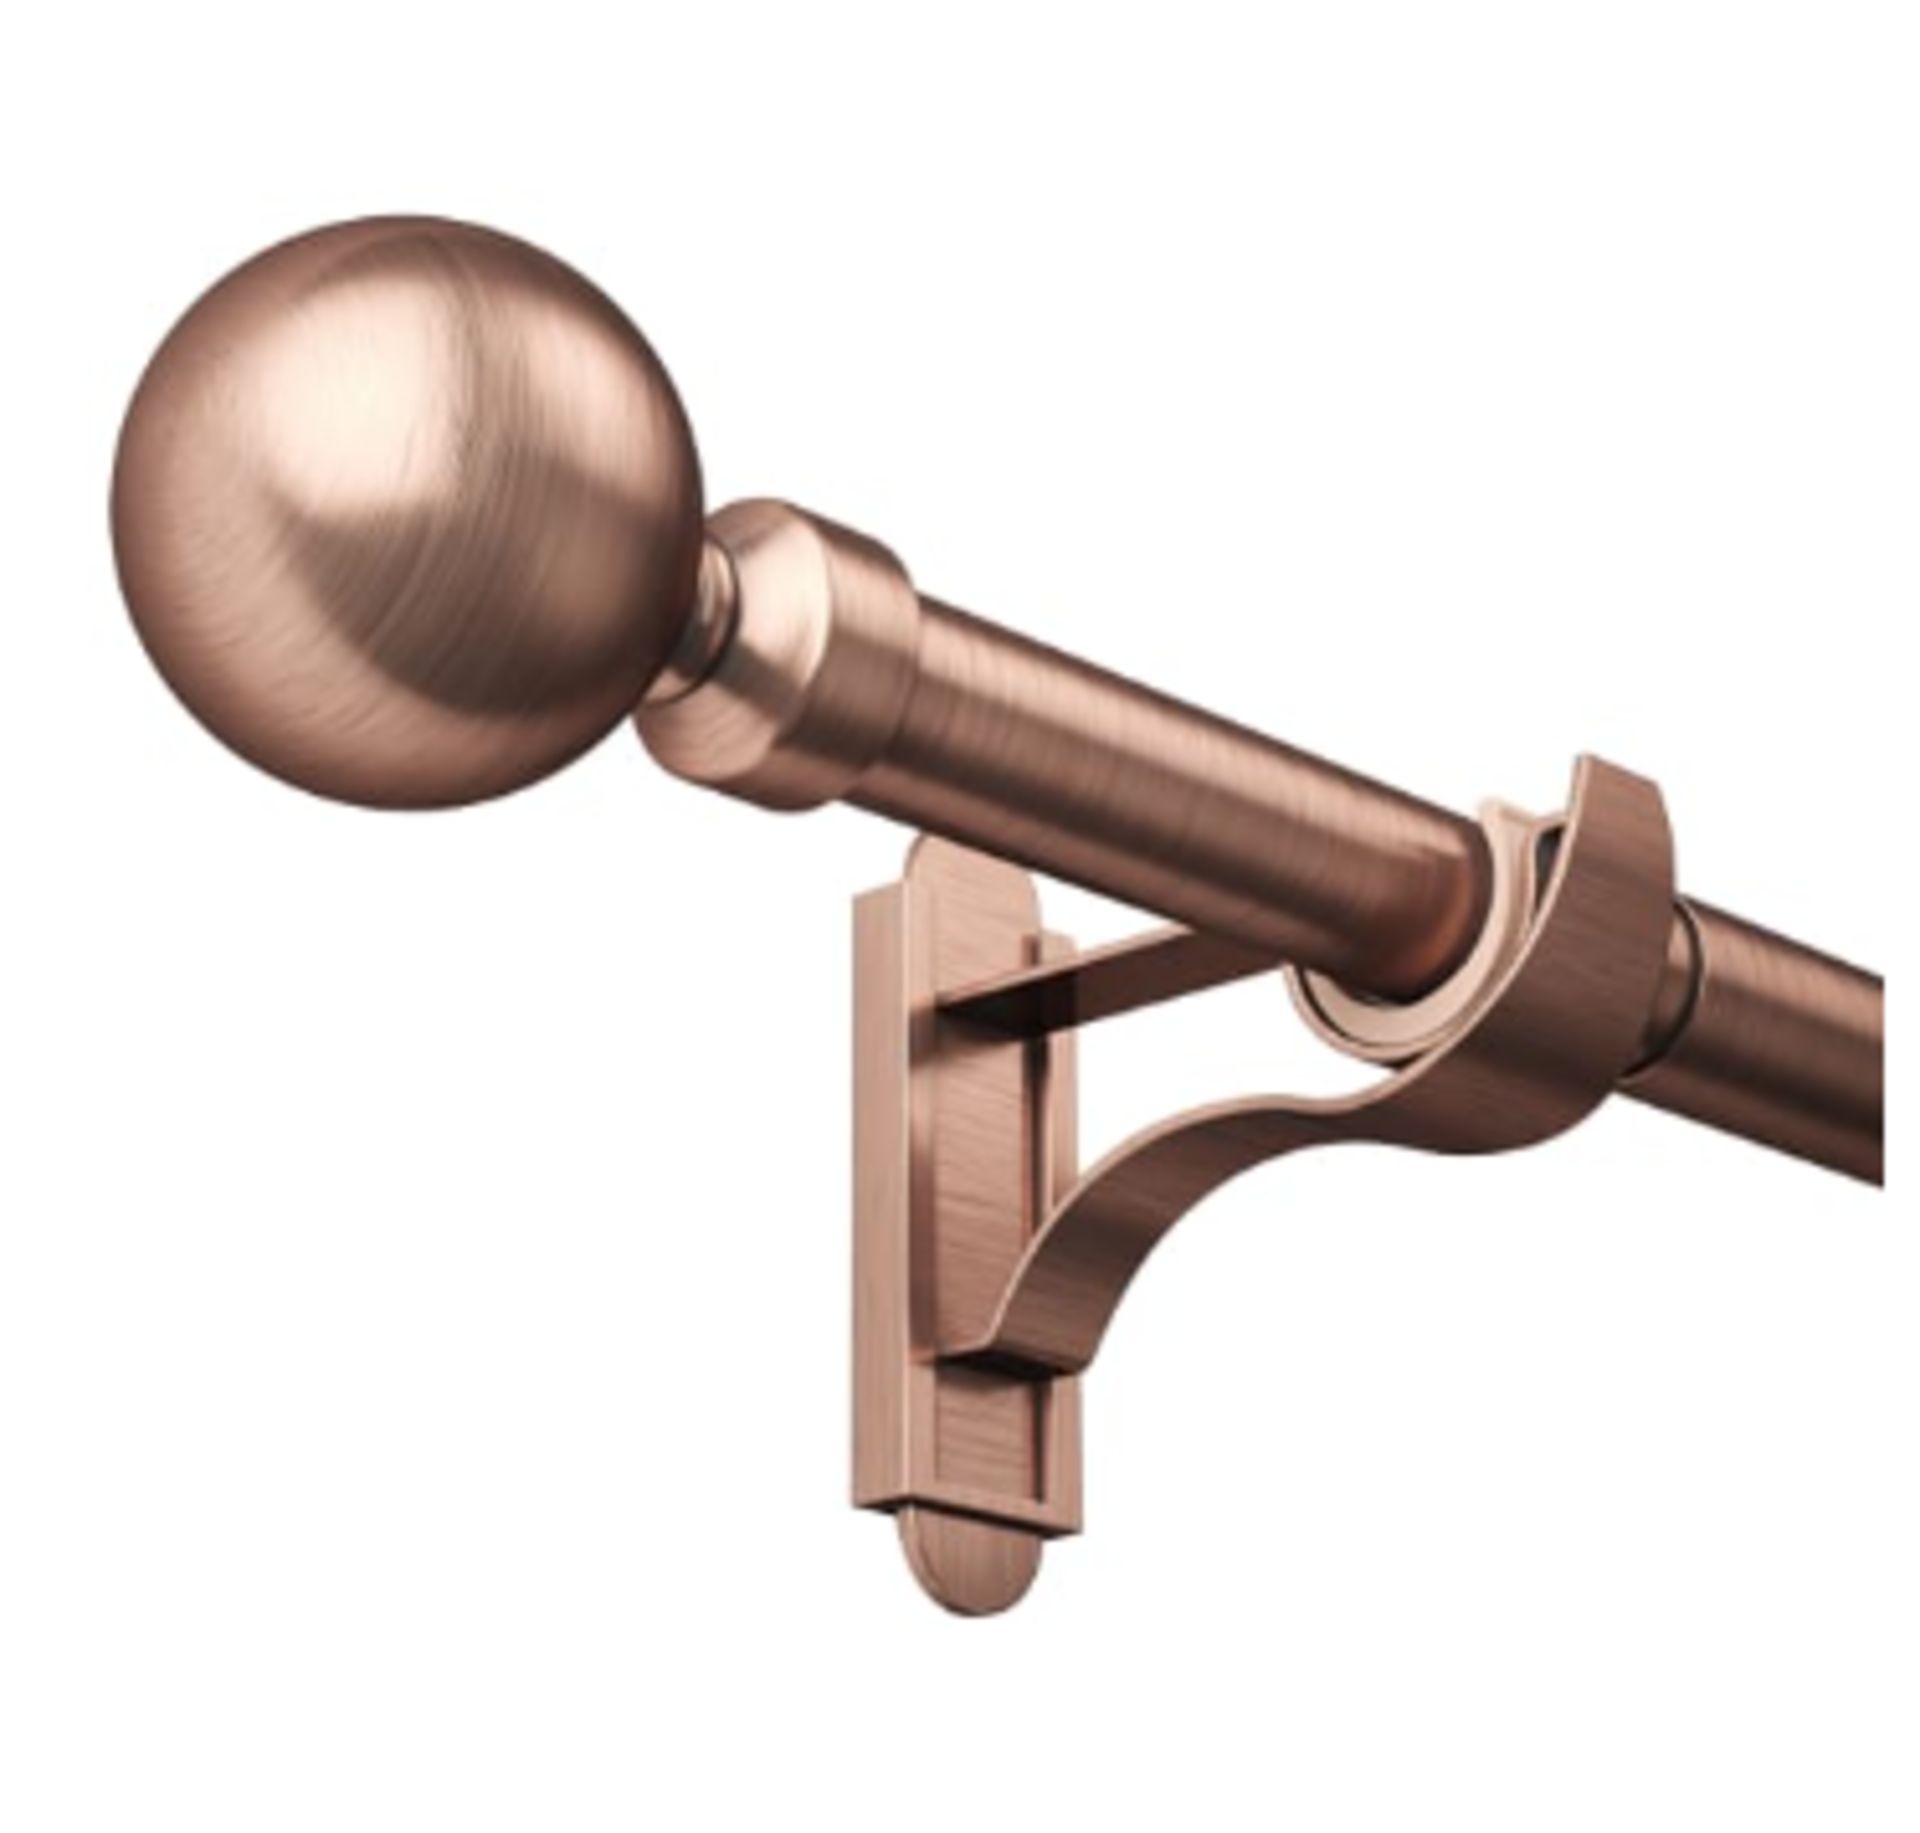 ROTHLEY ANTIQUE COPPER STEEL EXTENDABLE CURTAIN POLE WITH A SOLID ORB FINIAL - 165-300CM RRP £48